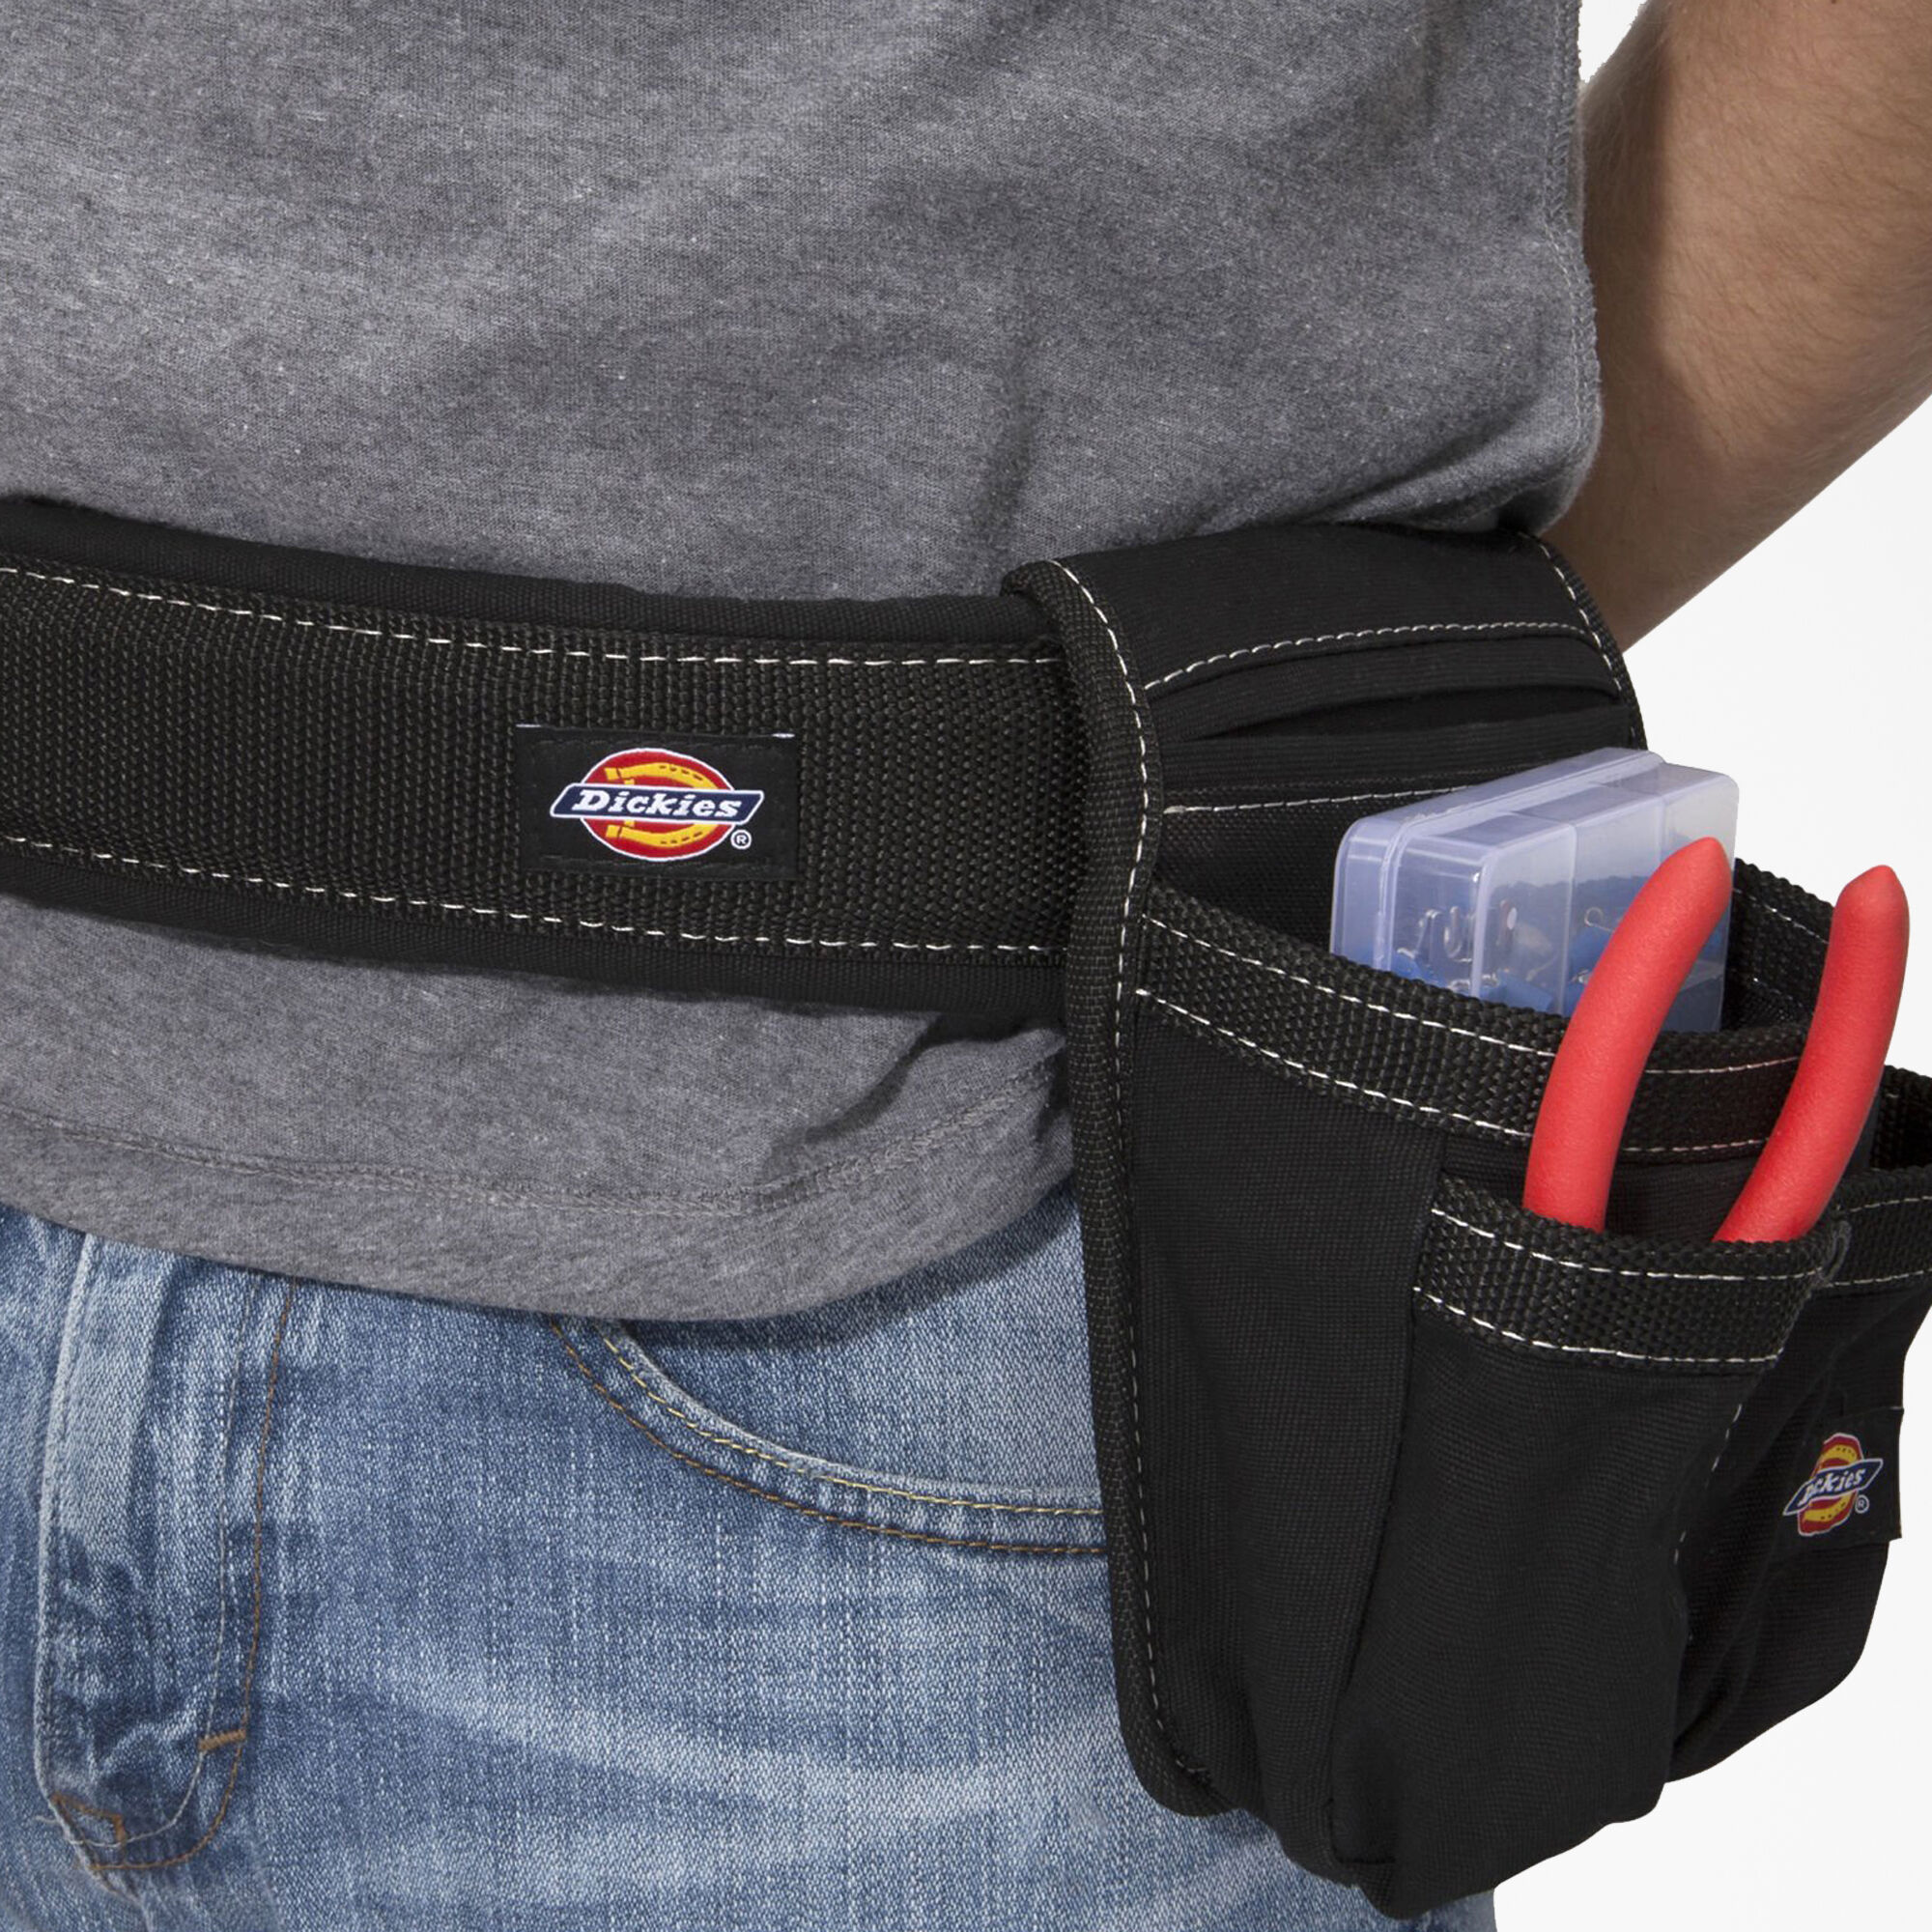 Dickies 57001 3-Inch Padded Work Belt with Quick-Release Buckle 